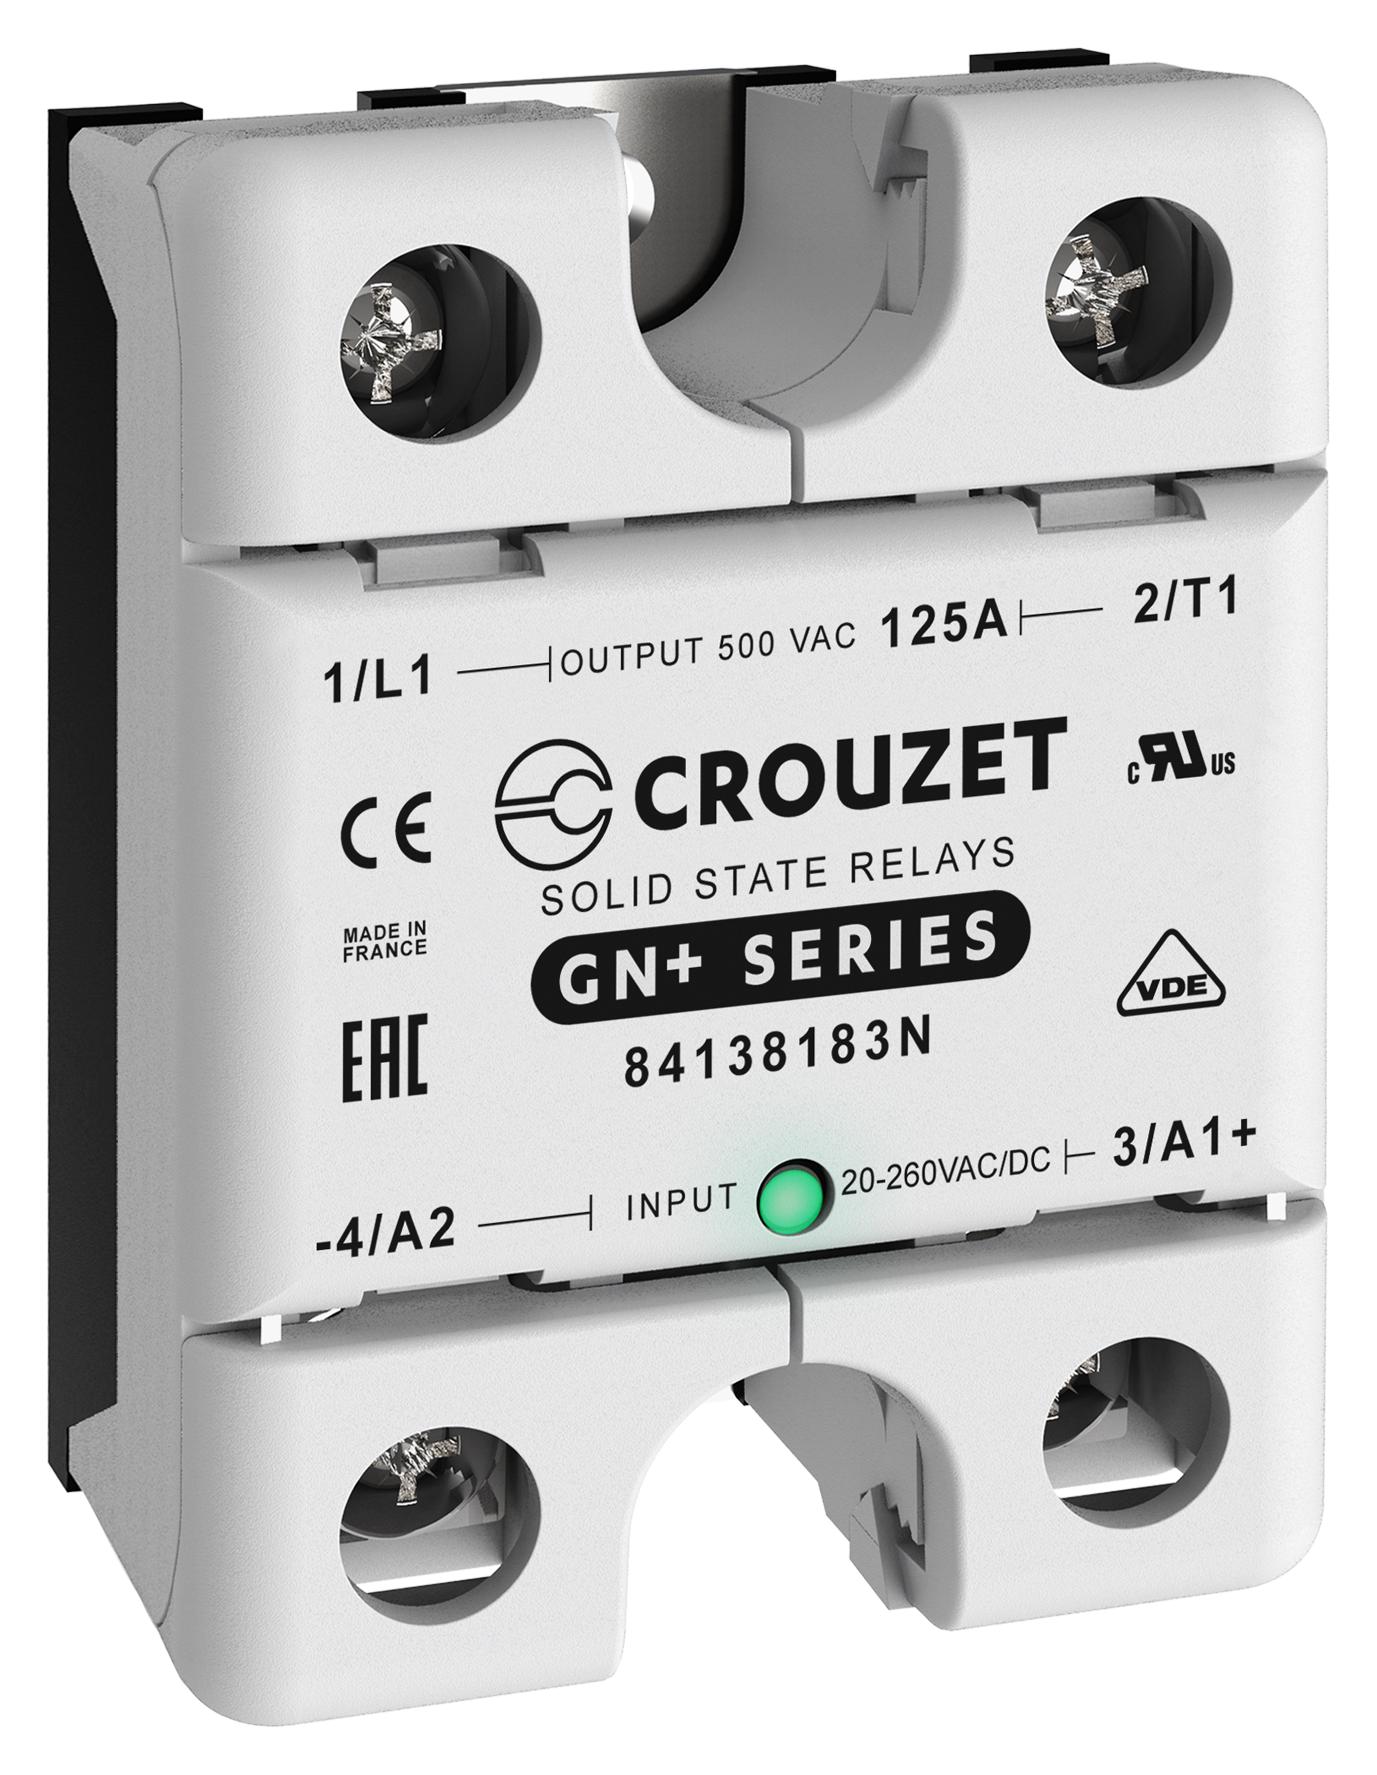 84138183N SOLID STATE RELAY, 125A, 24-500VAC/PANEL CROUZET